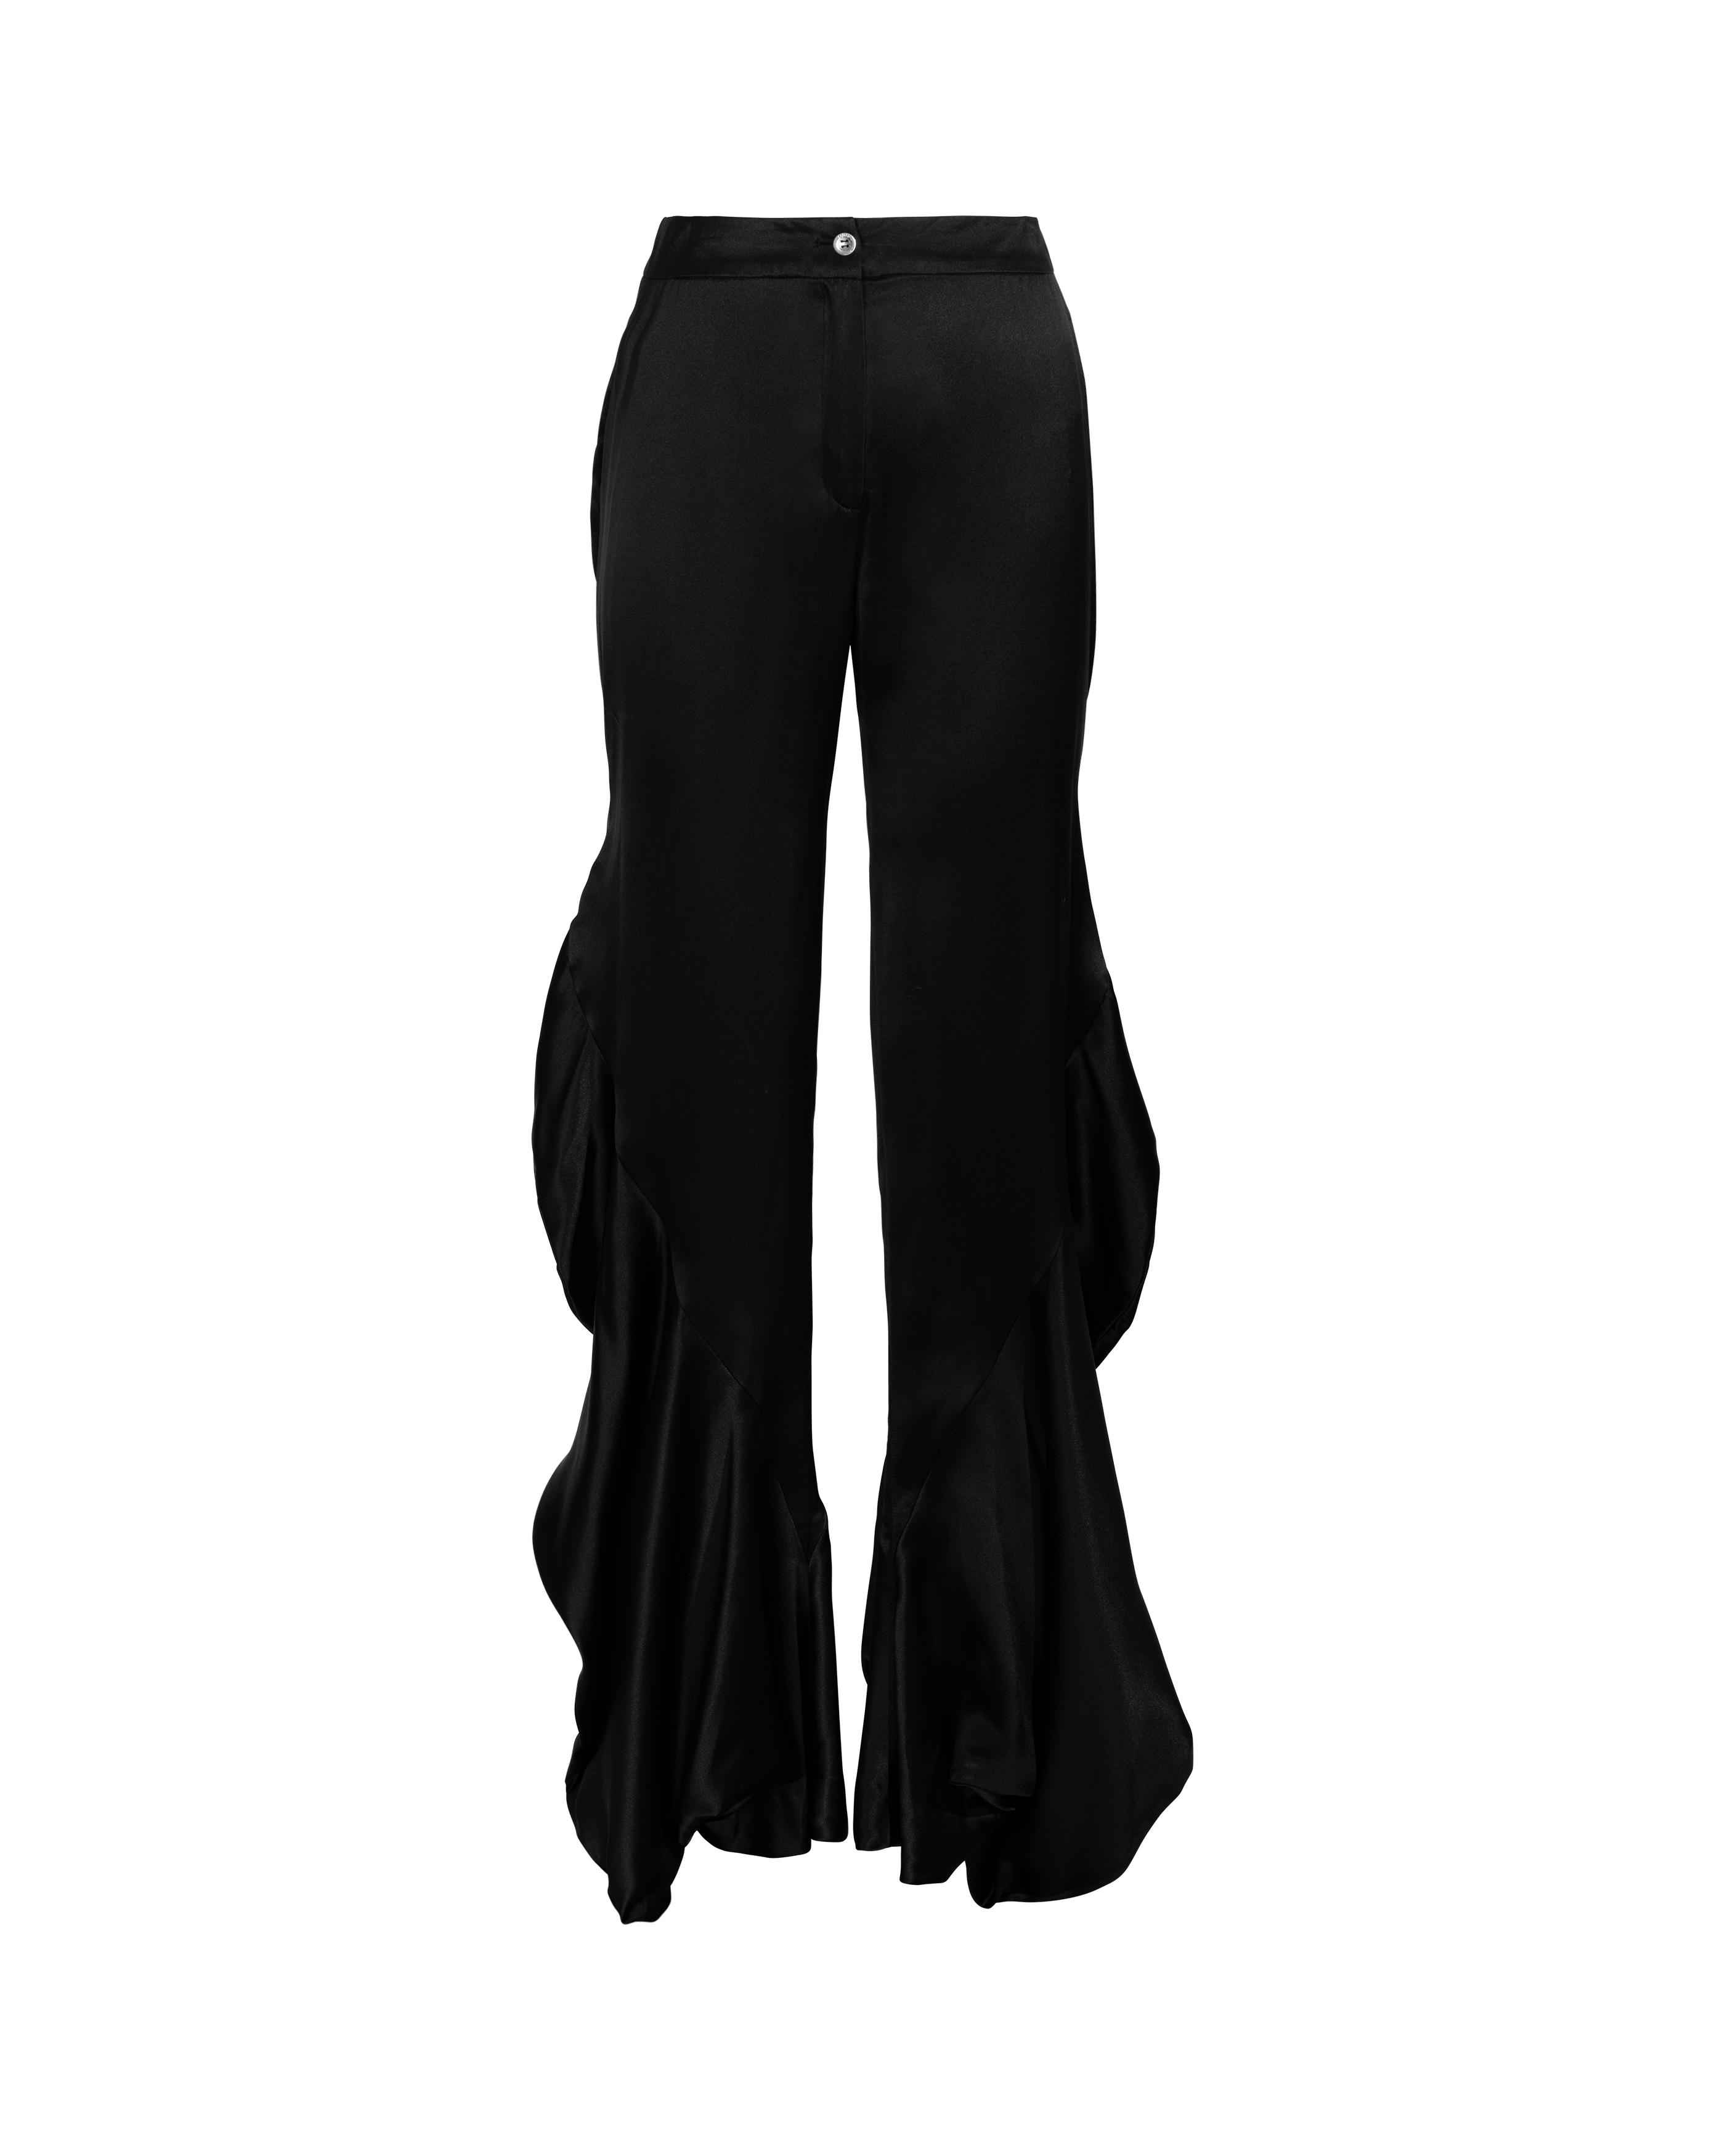 2000’s Silk Black Pants with Ruffle Sides